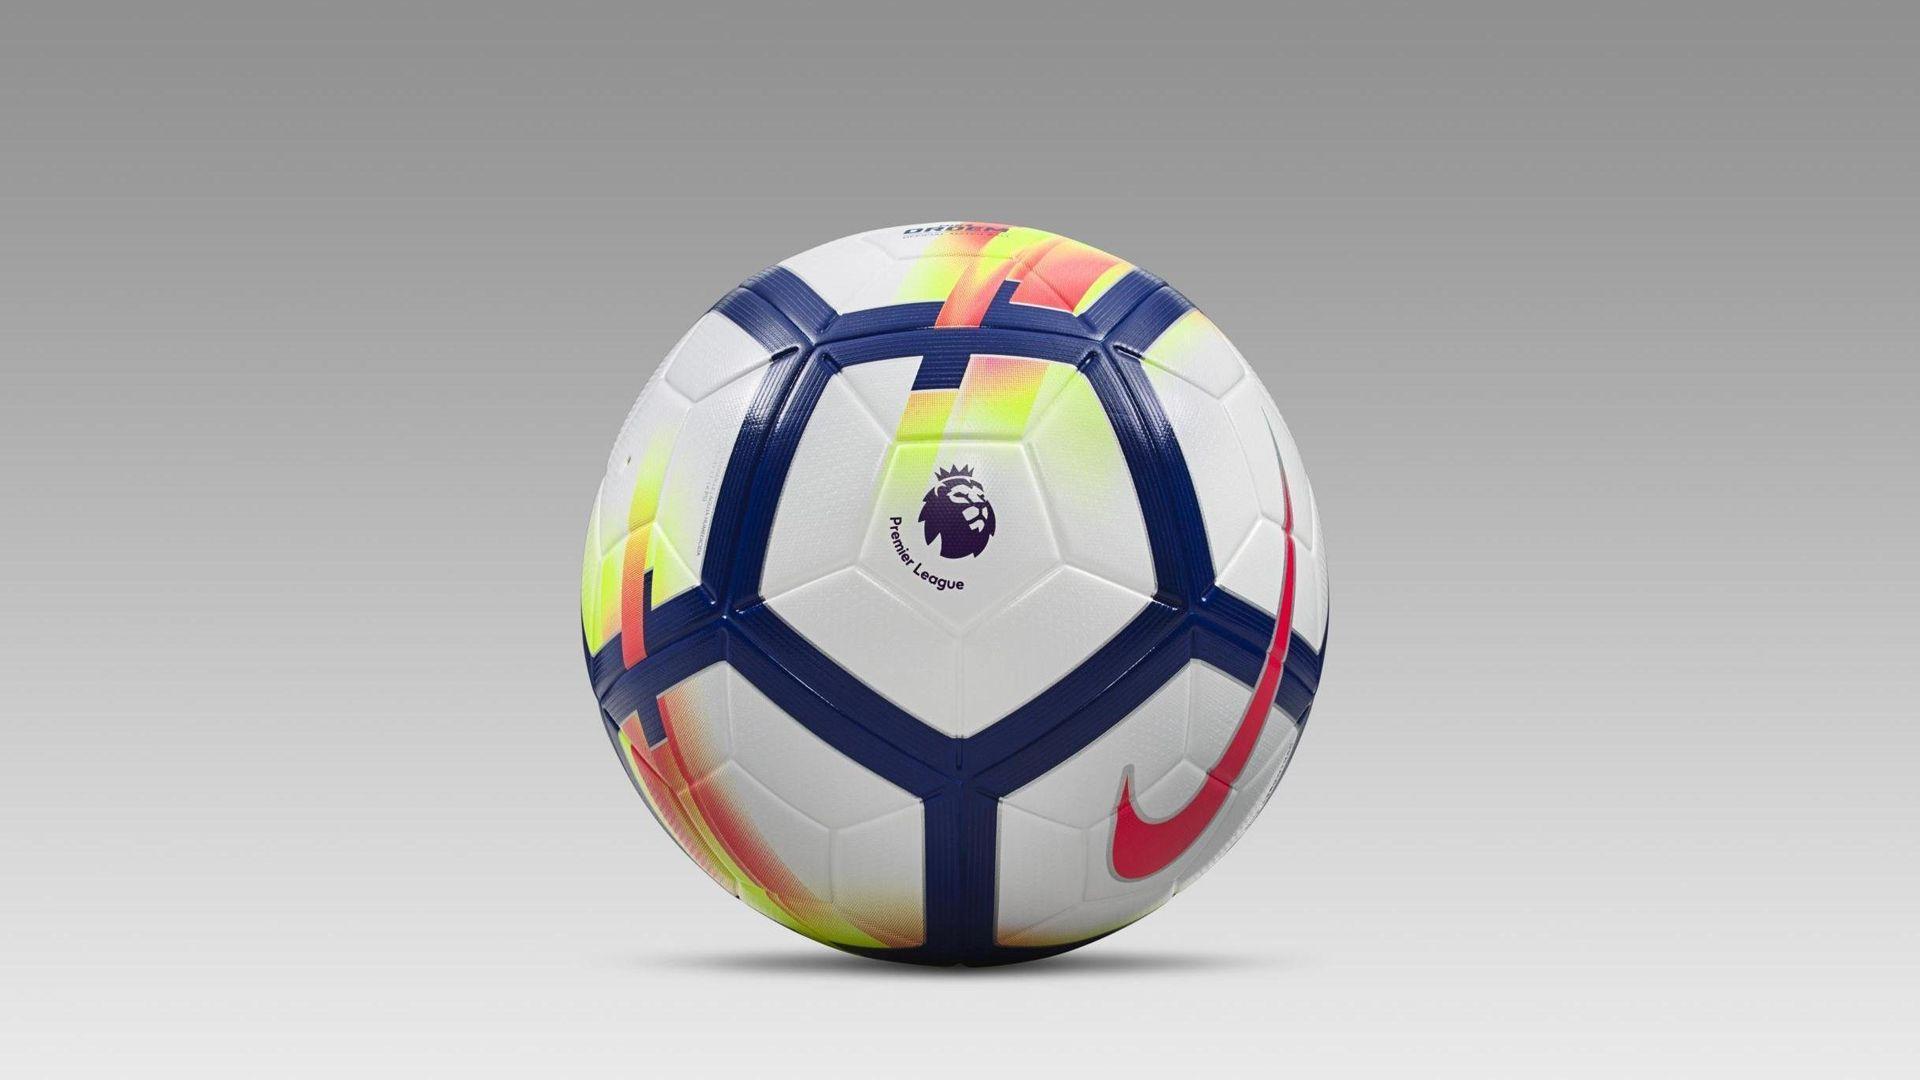 Pics Of Soccer Balls With Nike Premier League Ball 2017 2018. HD